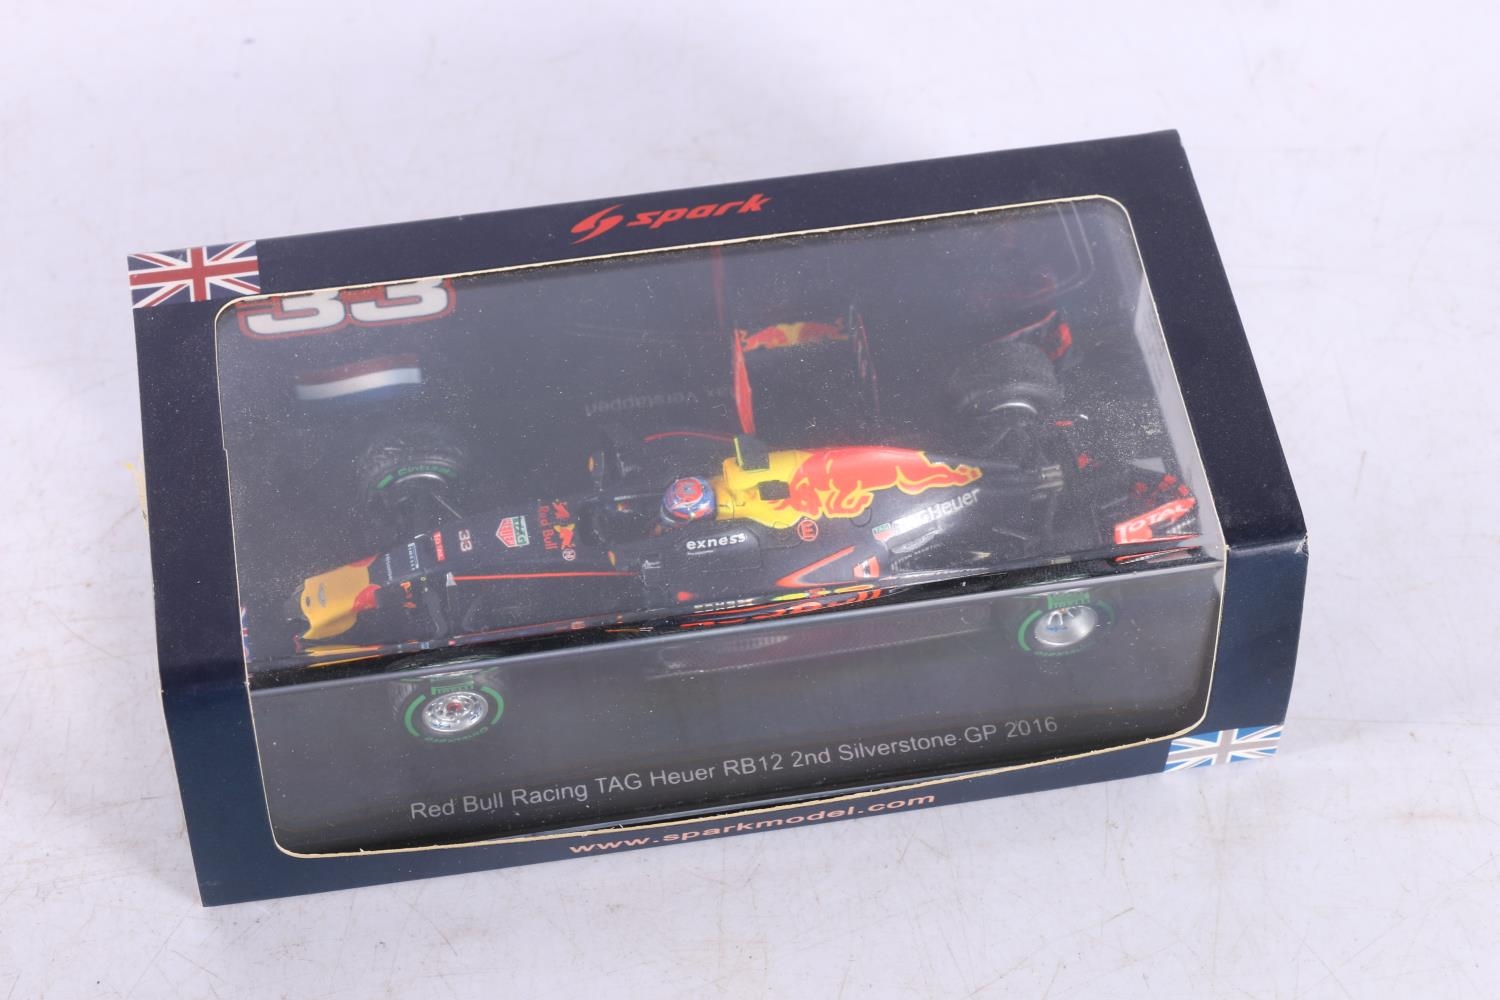 Spark (Minimax Import & Export Co Ltd) 1:43 scale collector's model Motorsport vehicles including - Image 6 of 7